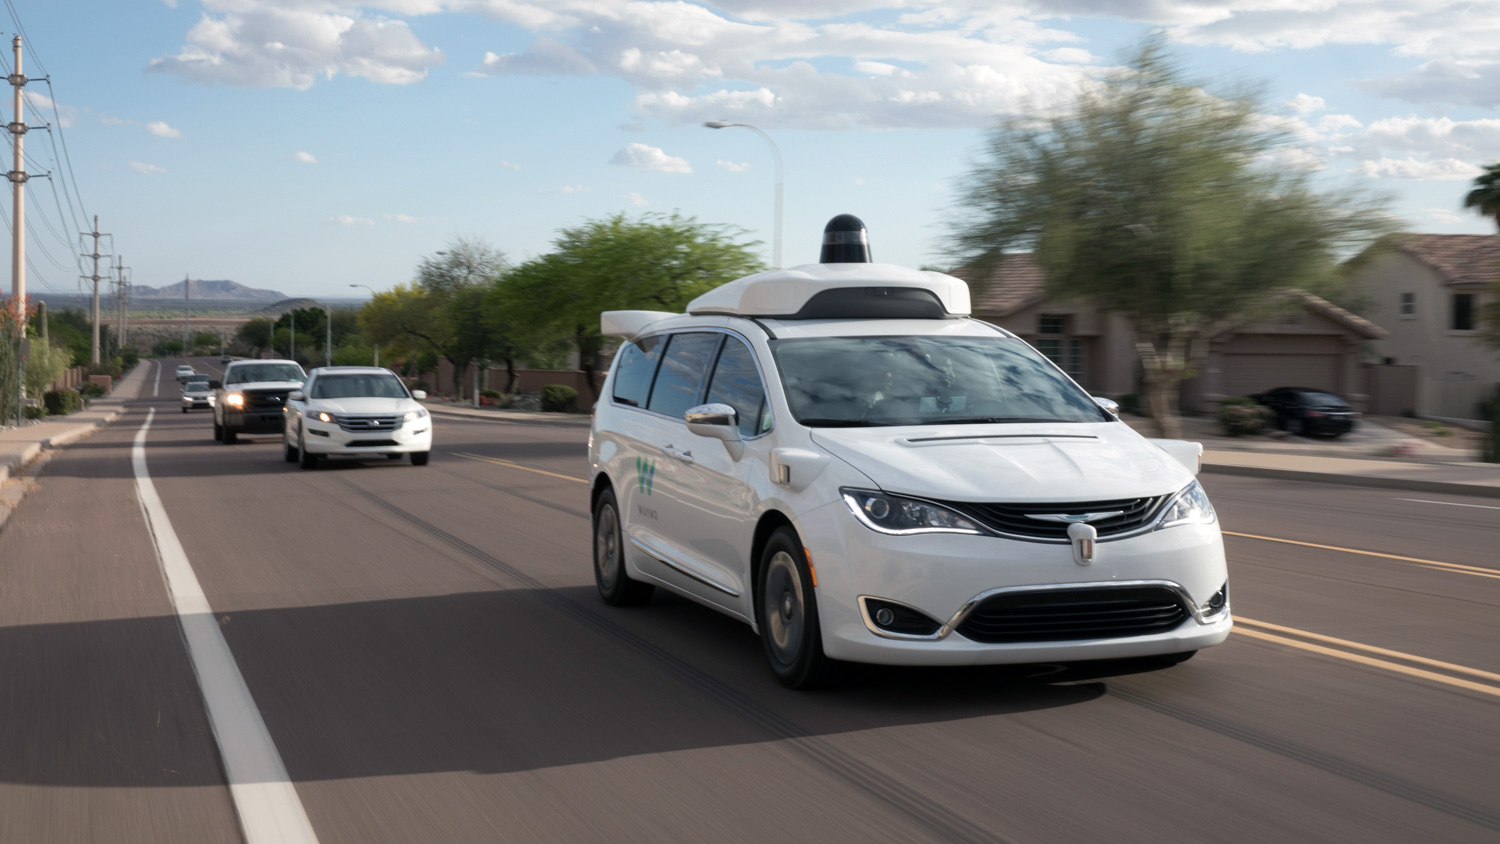 Waymo shares in-depth details of self-driving car activity in Phoenix